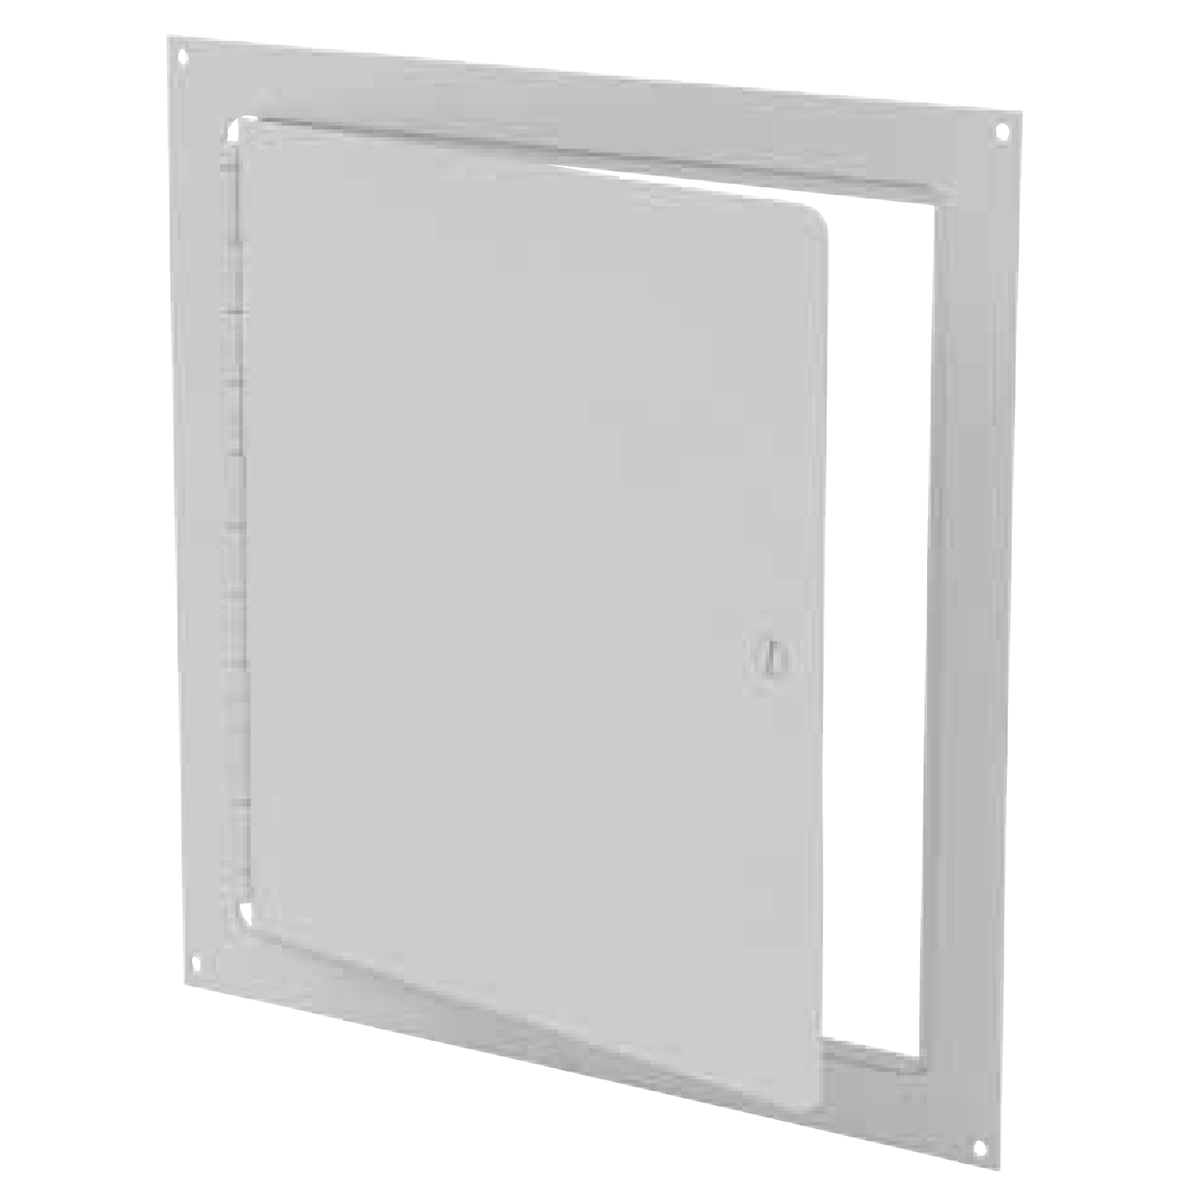 Access Door - E-SF  8x8 Surface Mount, Primer Coated Steel